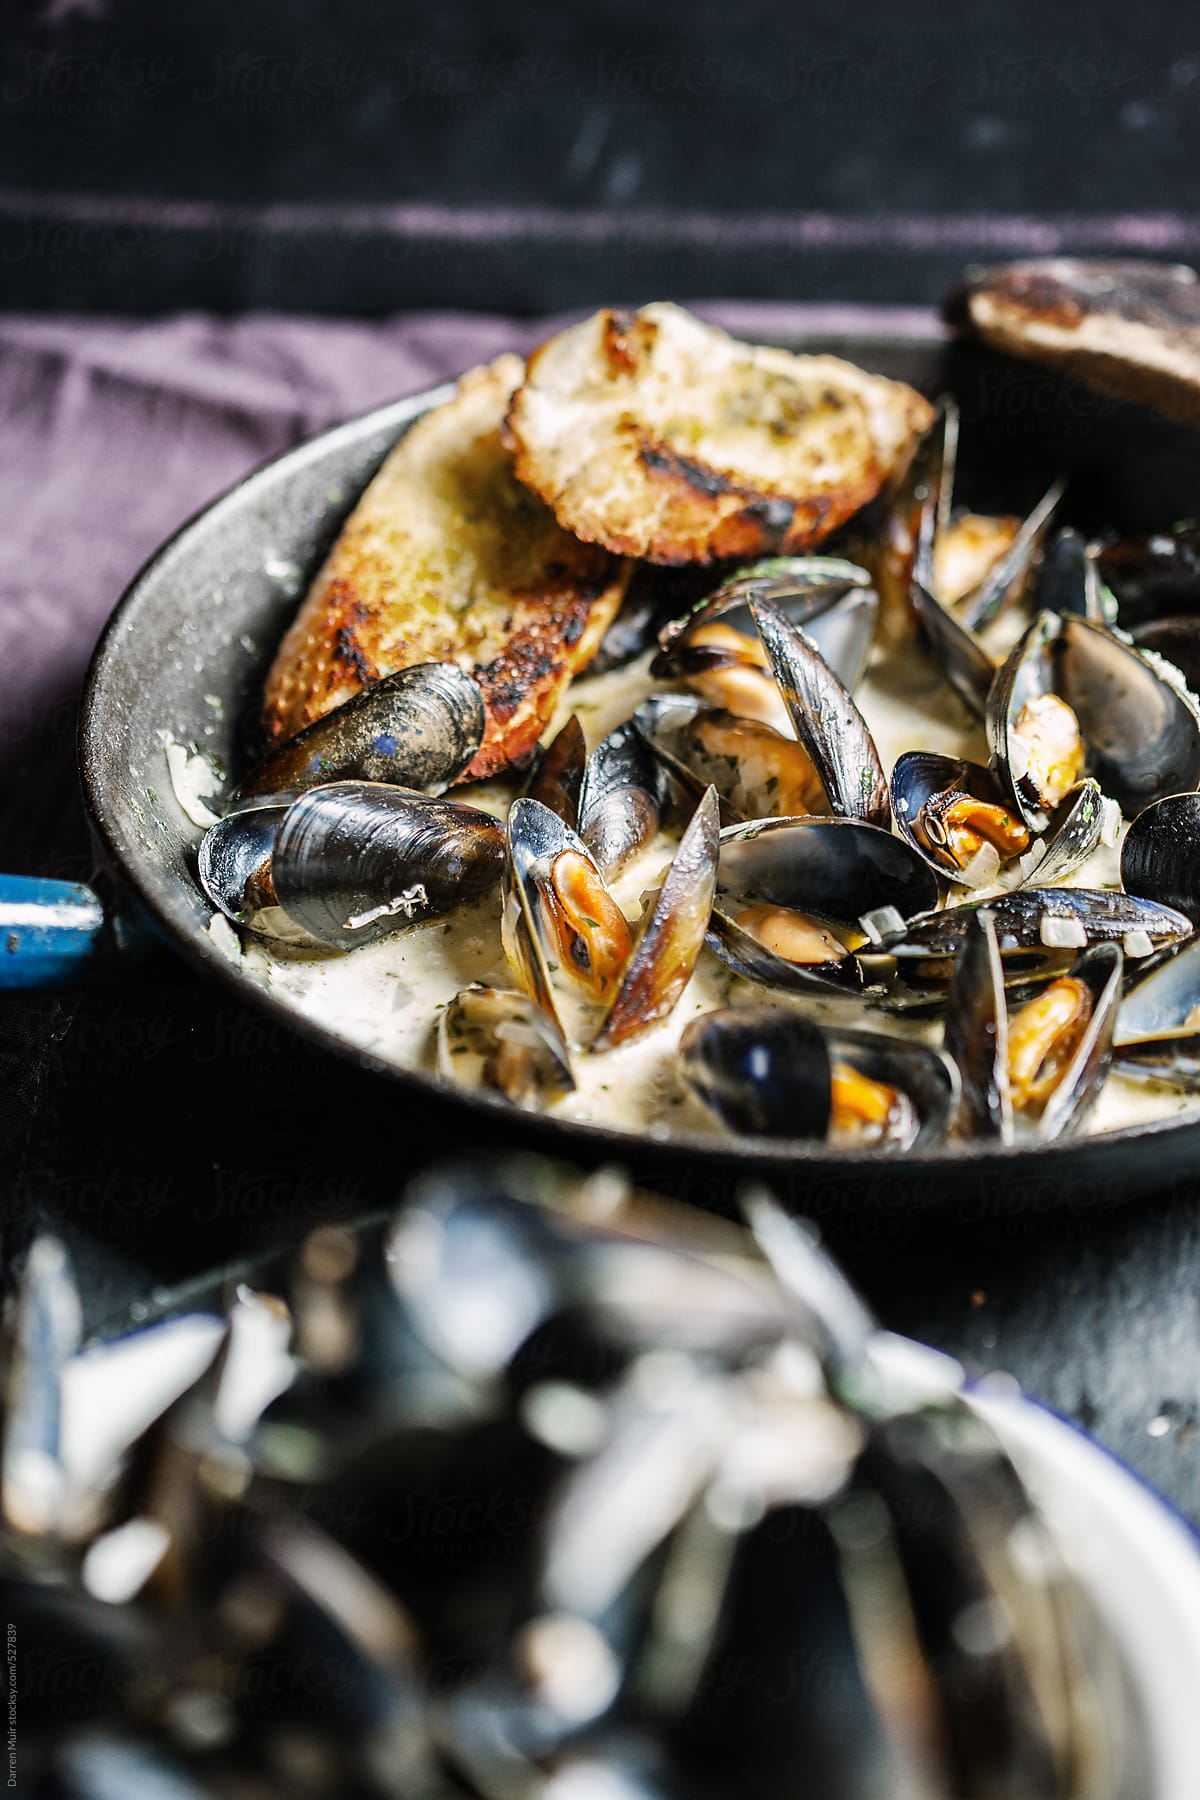 Cooked mussels in a creamy garlic and white wine sauce.